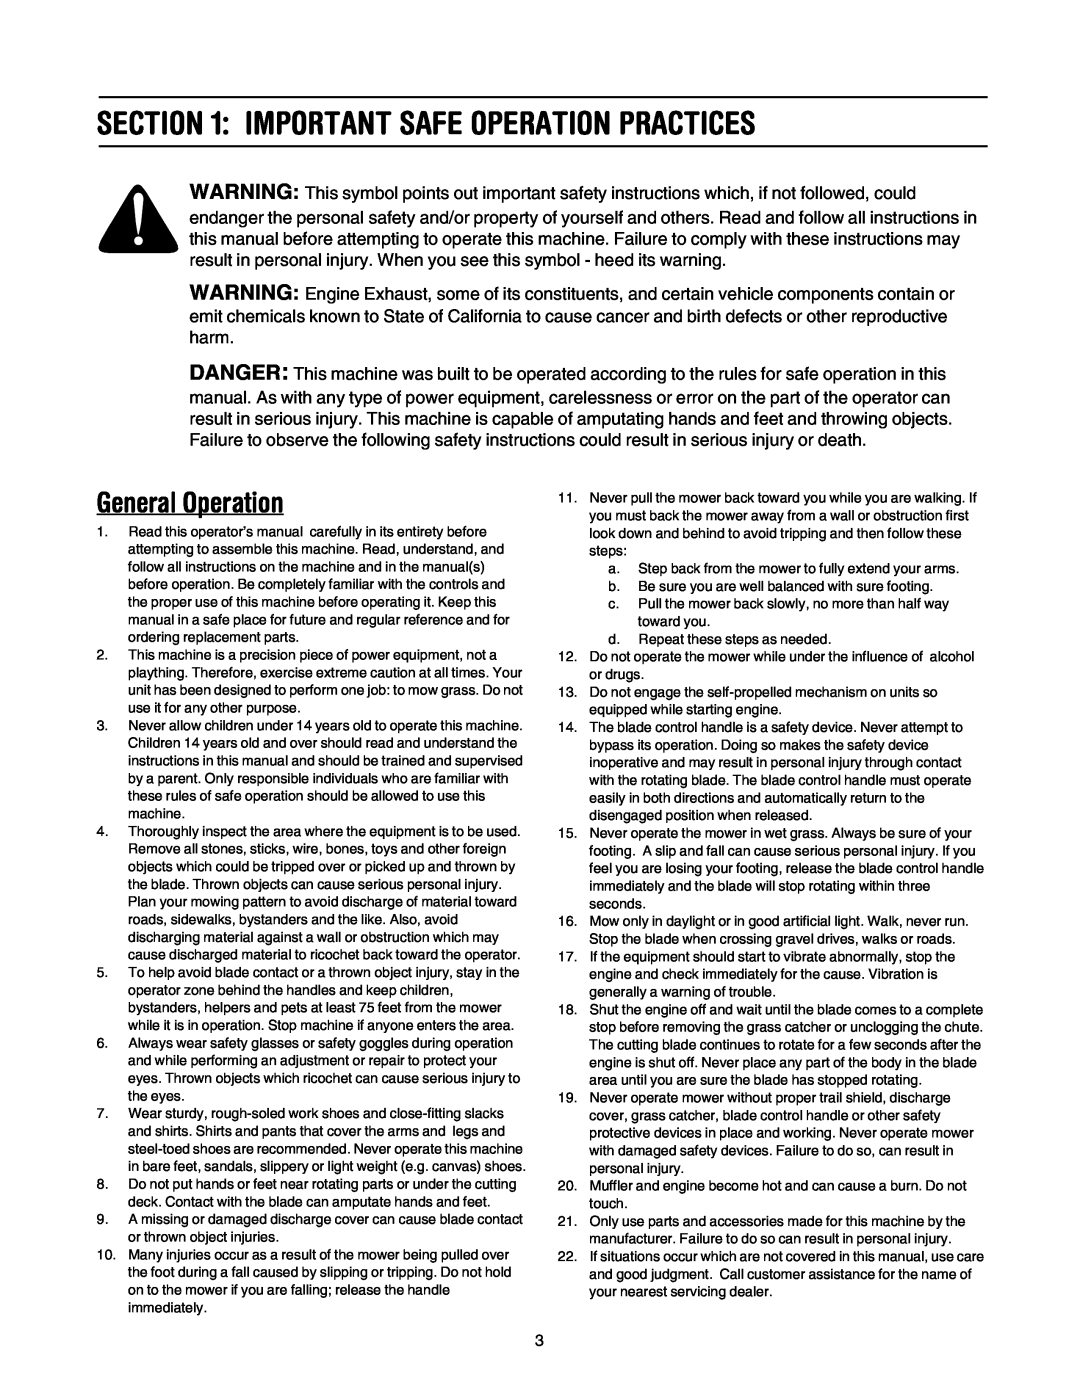 MTD 20 manual Important Safe Operation Practices, General Operation 